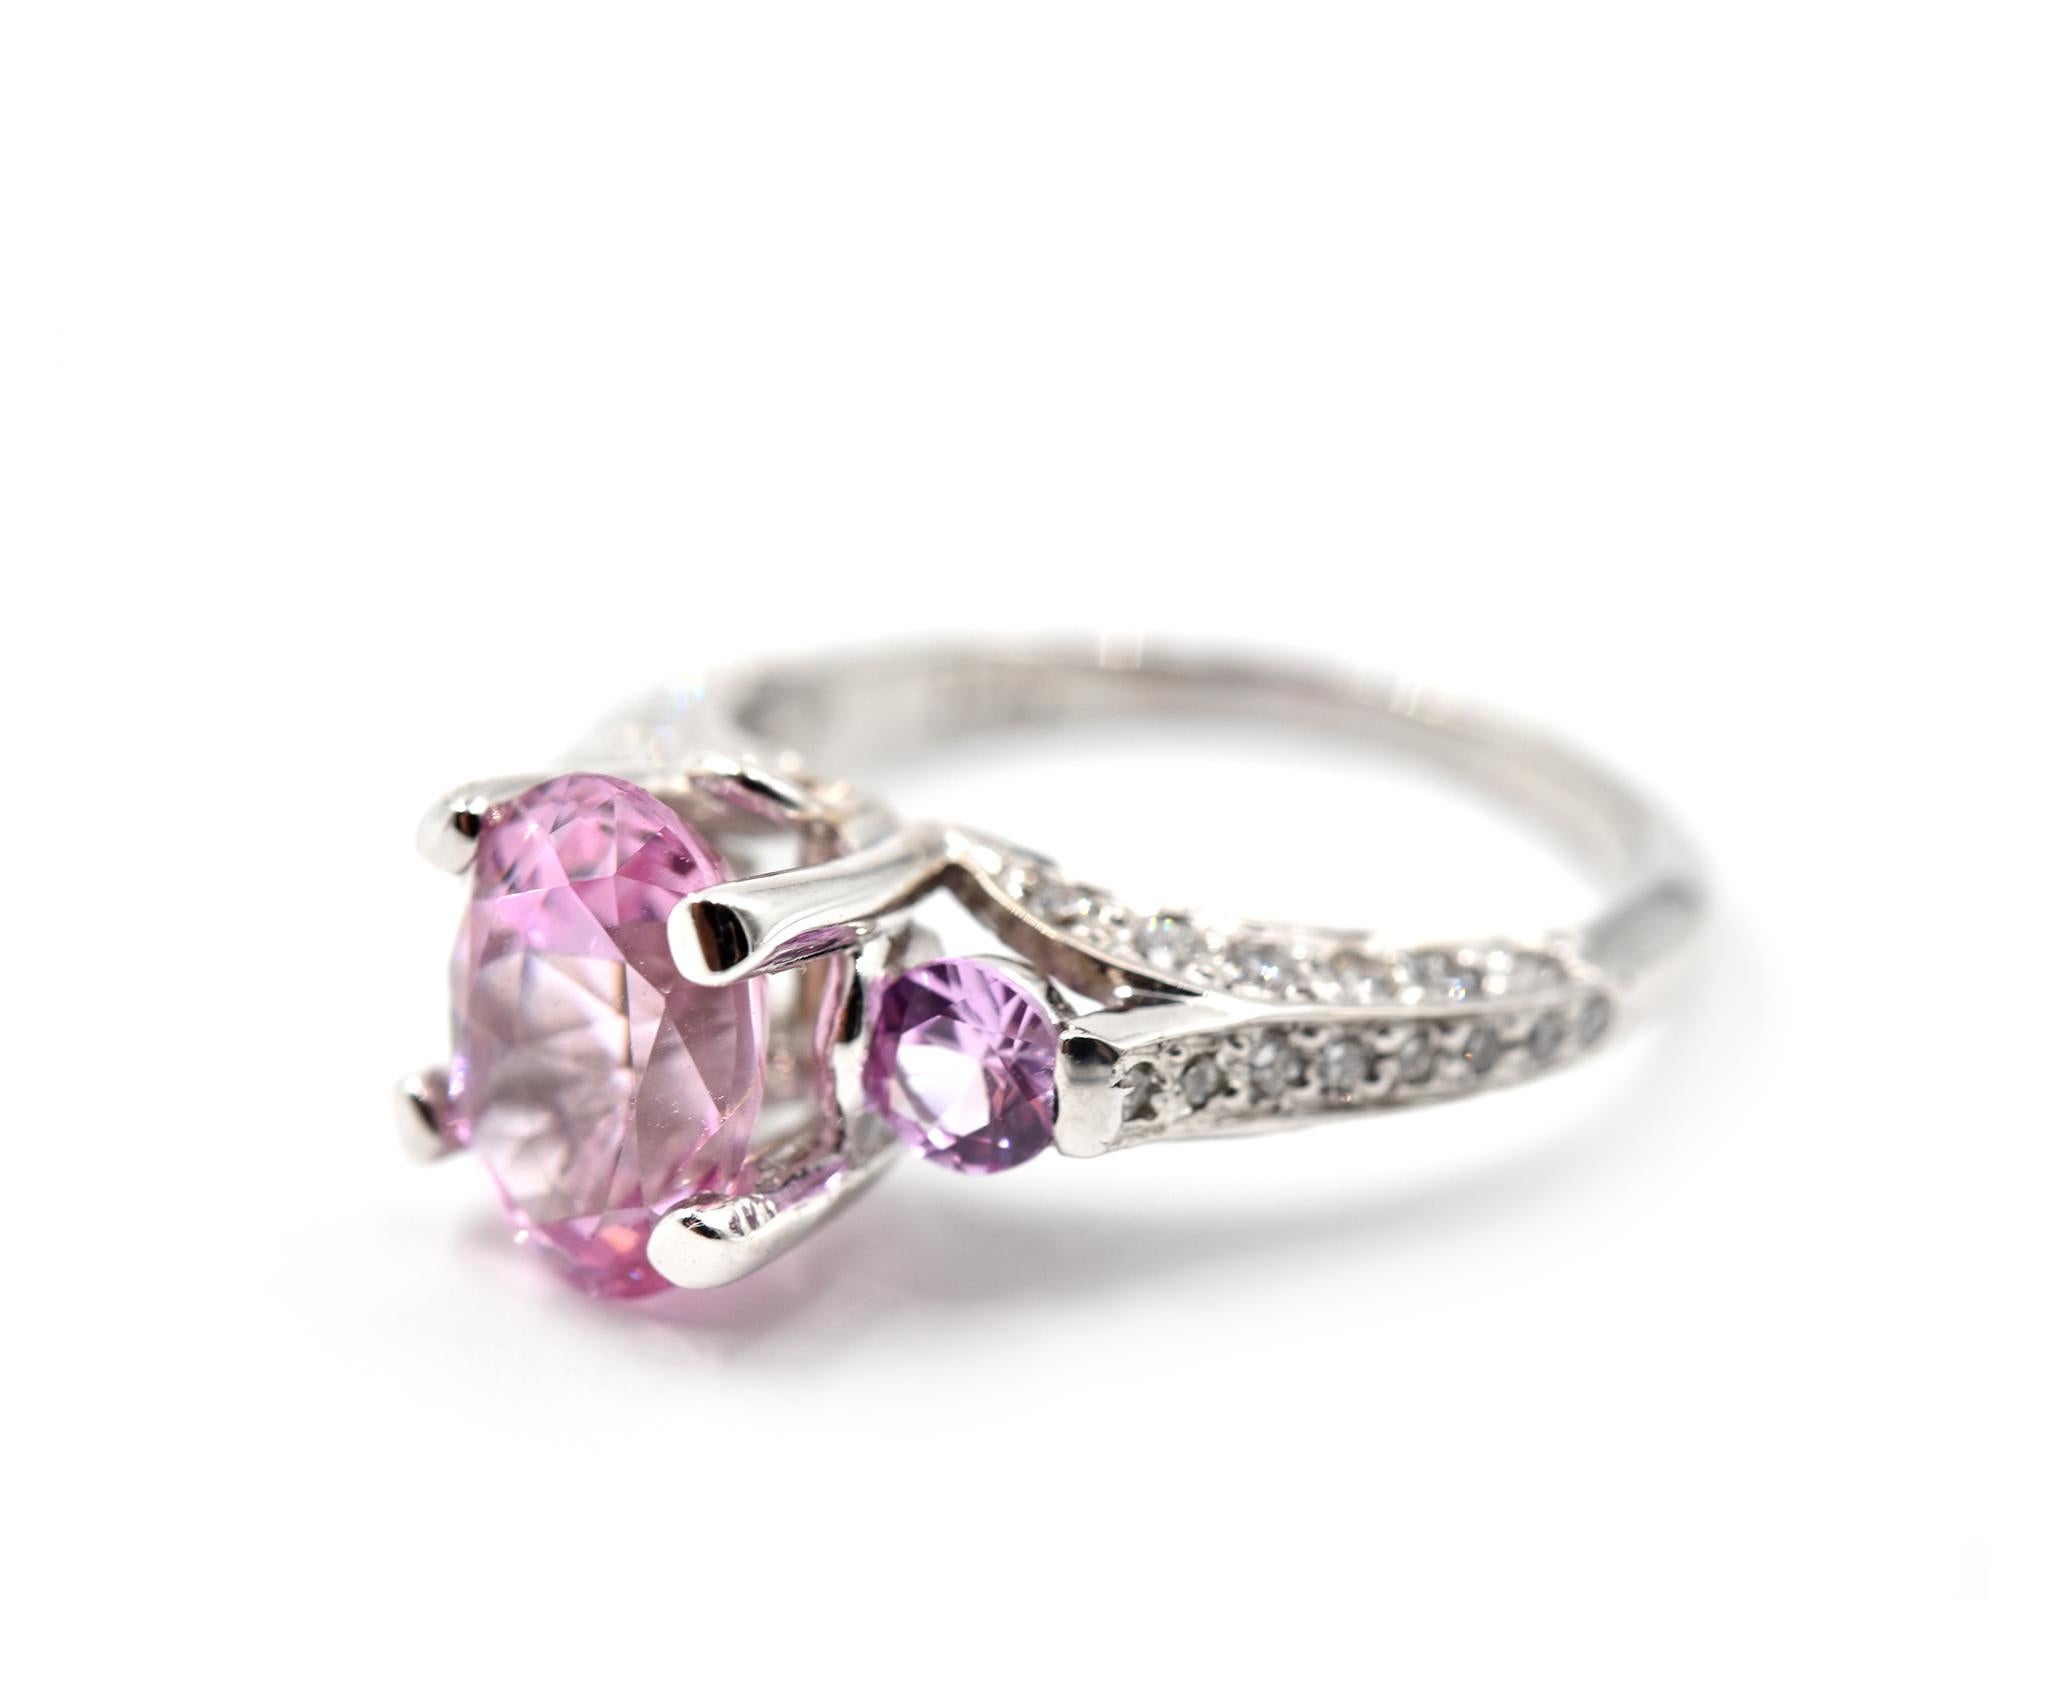 Designer: custom design
Material: 18k white gold
Pink Spinel: one oval cut 1.75 carat 
Diamonds: 40 round brilliant cuts = 0.33 carat weight
Color: G
Clarity: VS2-SI1
Ring Size: 7 (please allow two additional shipping days for sizing